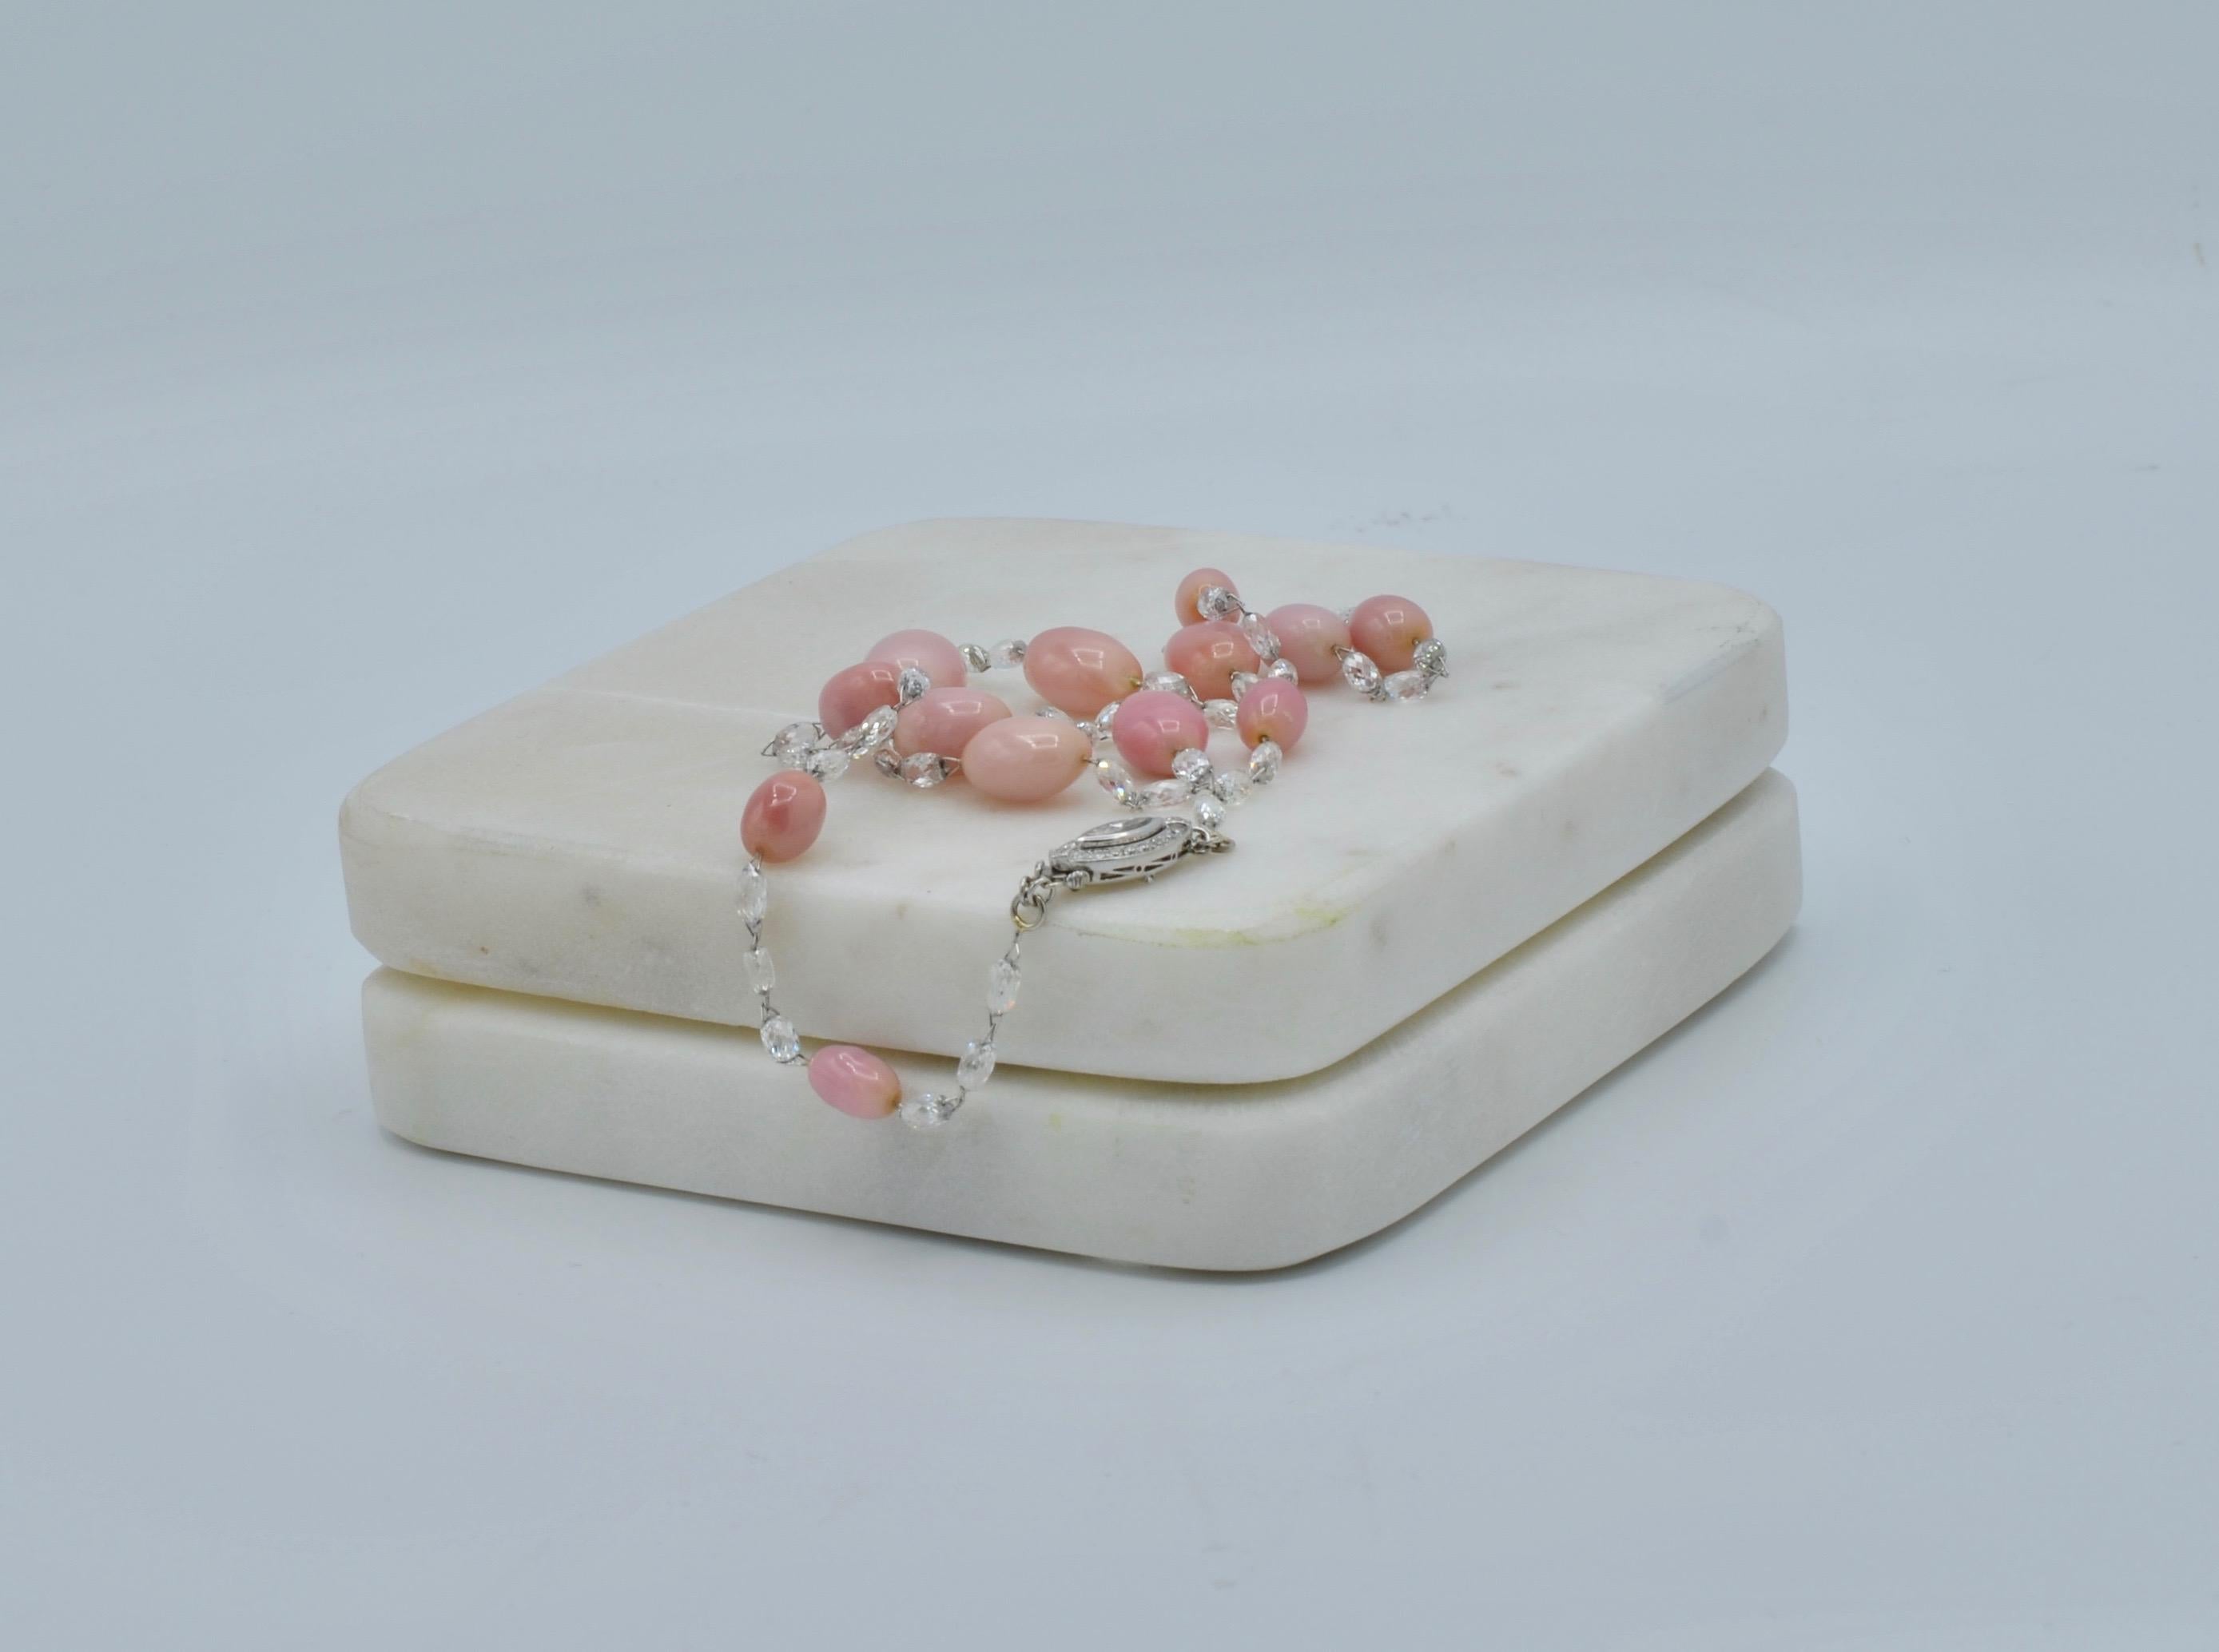 This stunning Diamond and Natural Conch Pearl necklace is very rare and unique. Pretty and pastel-hued, a conch pearl is a calcareous concretion produced by the Queen conch (pronounced “conk”) mollusk, which is a large, edible sea snail. Most often